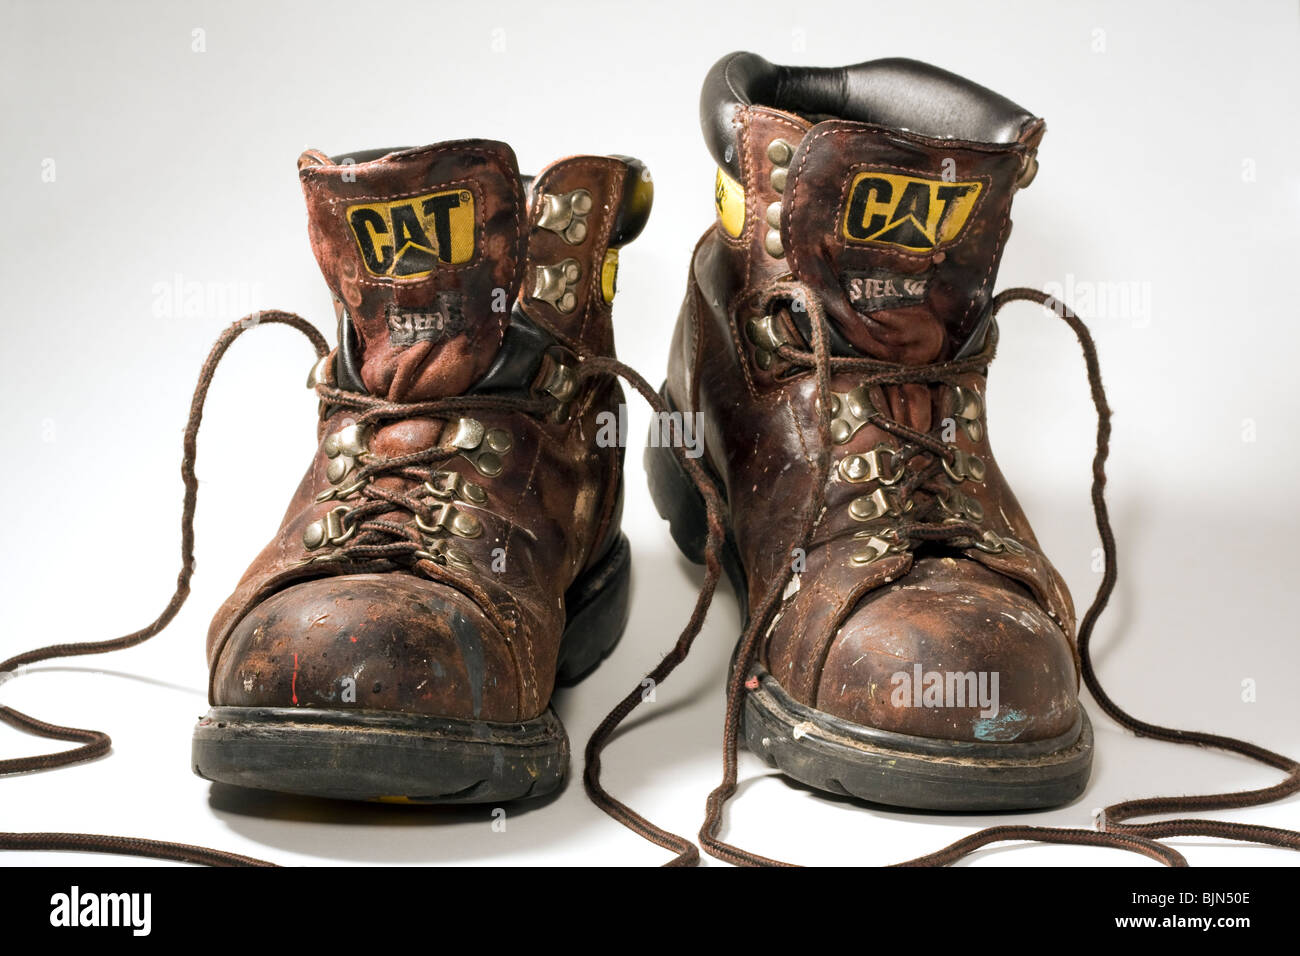 Caterpillar Steel Toed Work Boots on White Background. Stock Photo